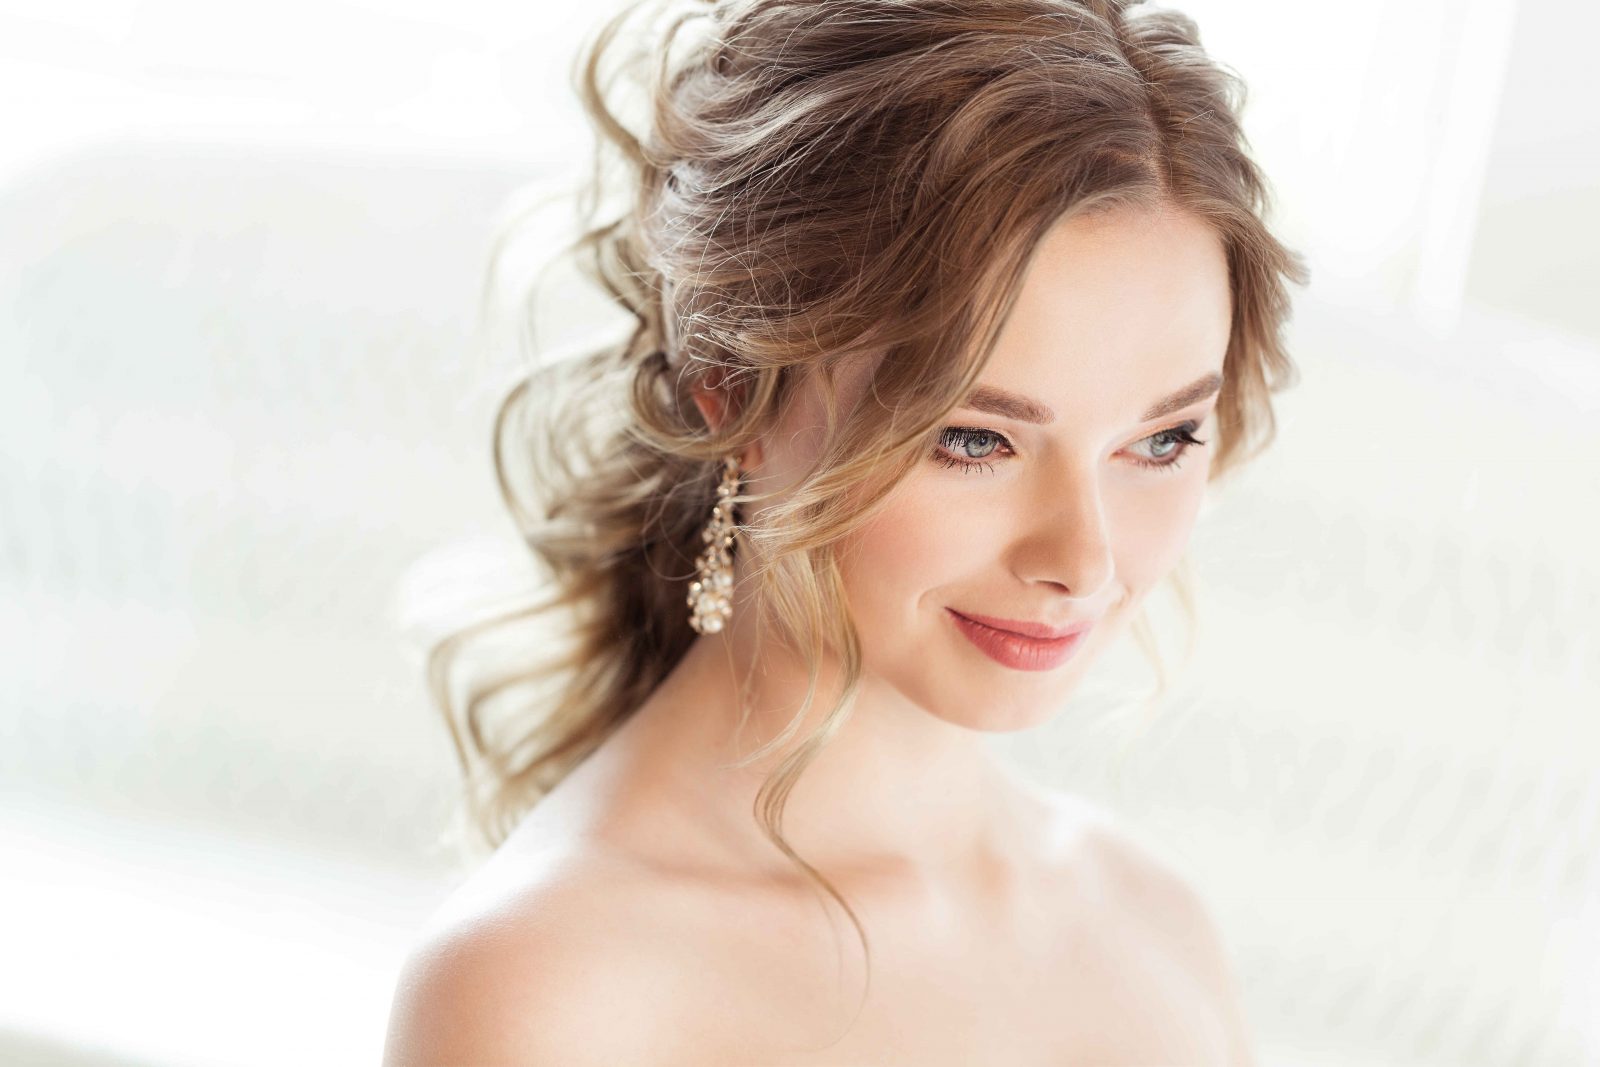 Accomplish A Bridal Glow With These Pre-Wedding Skin Treatments – Haute Beauty by Haute Living